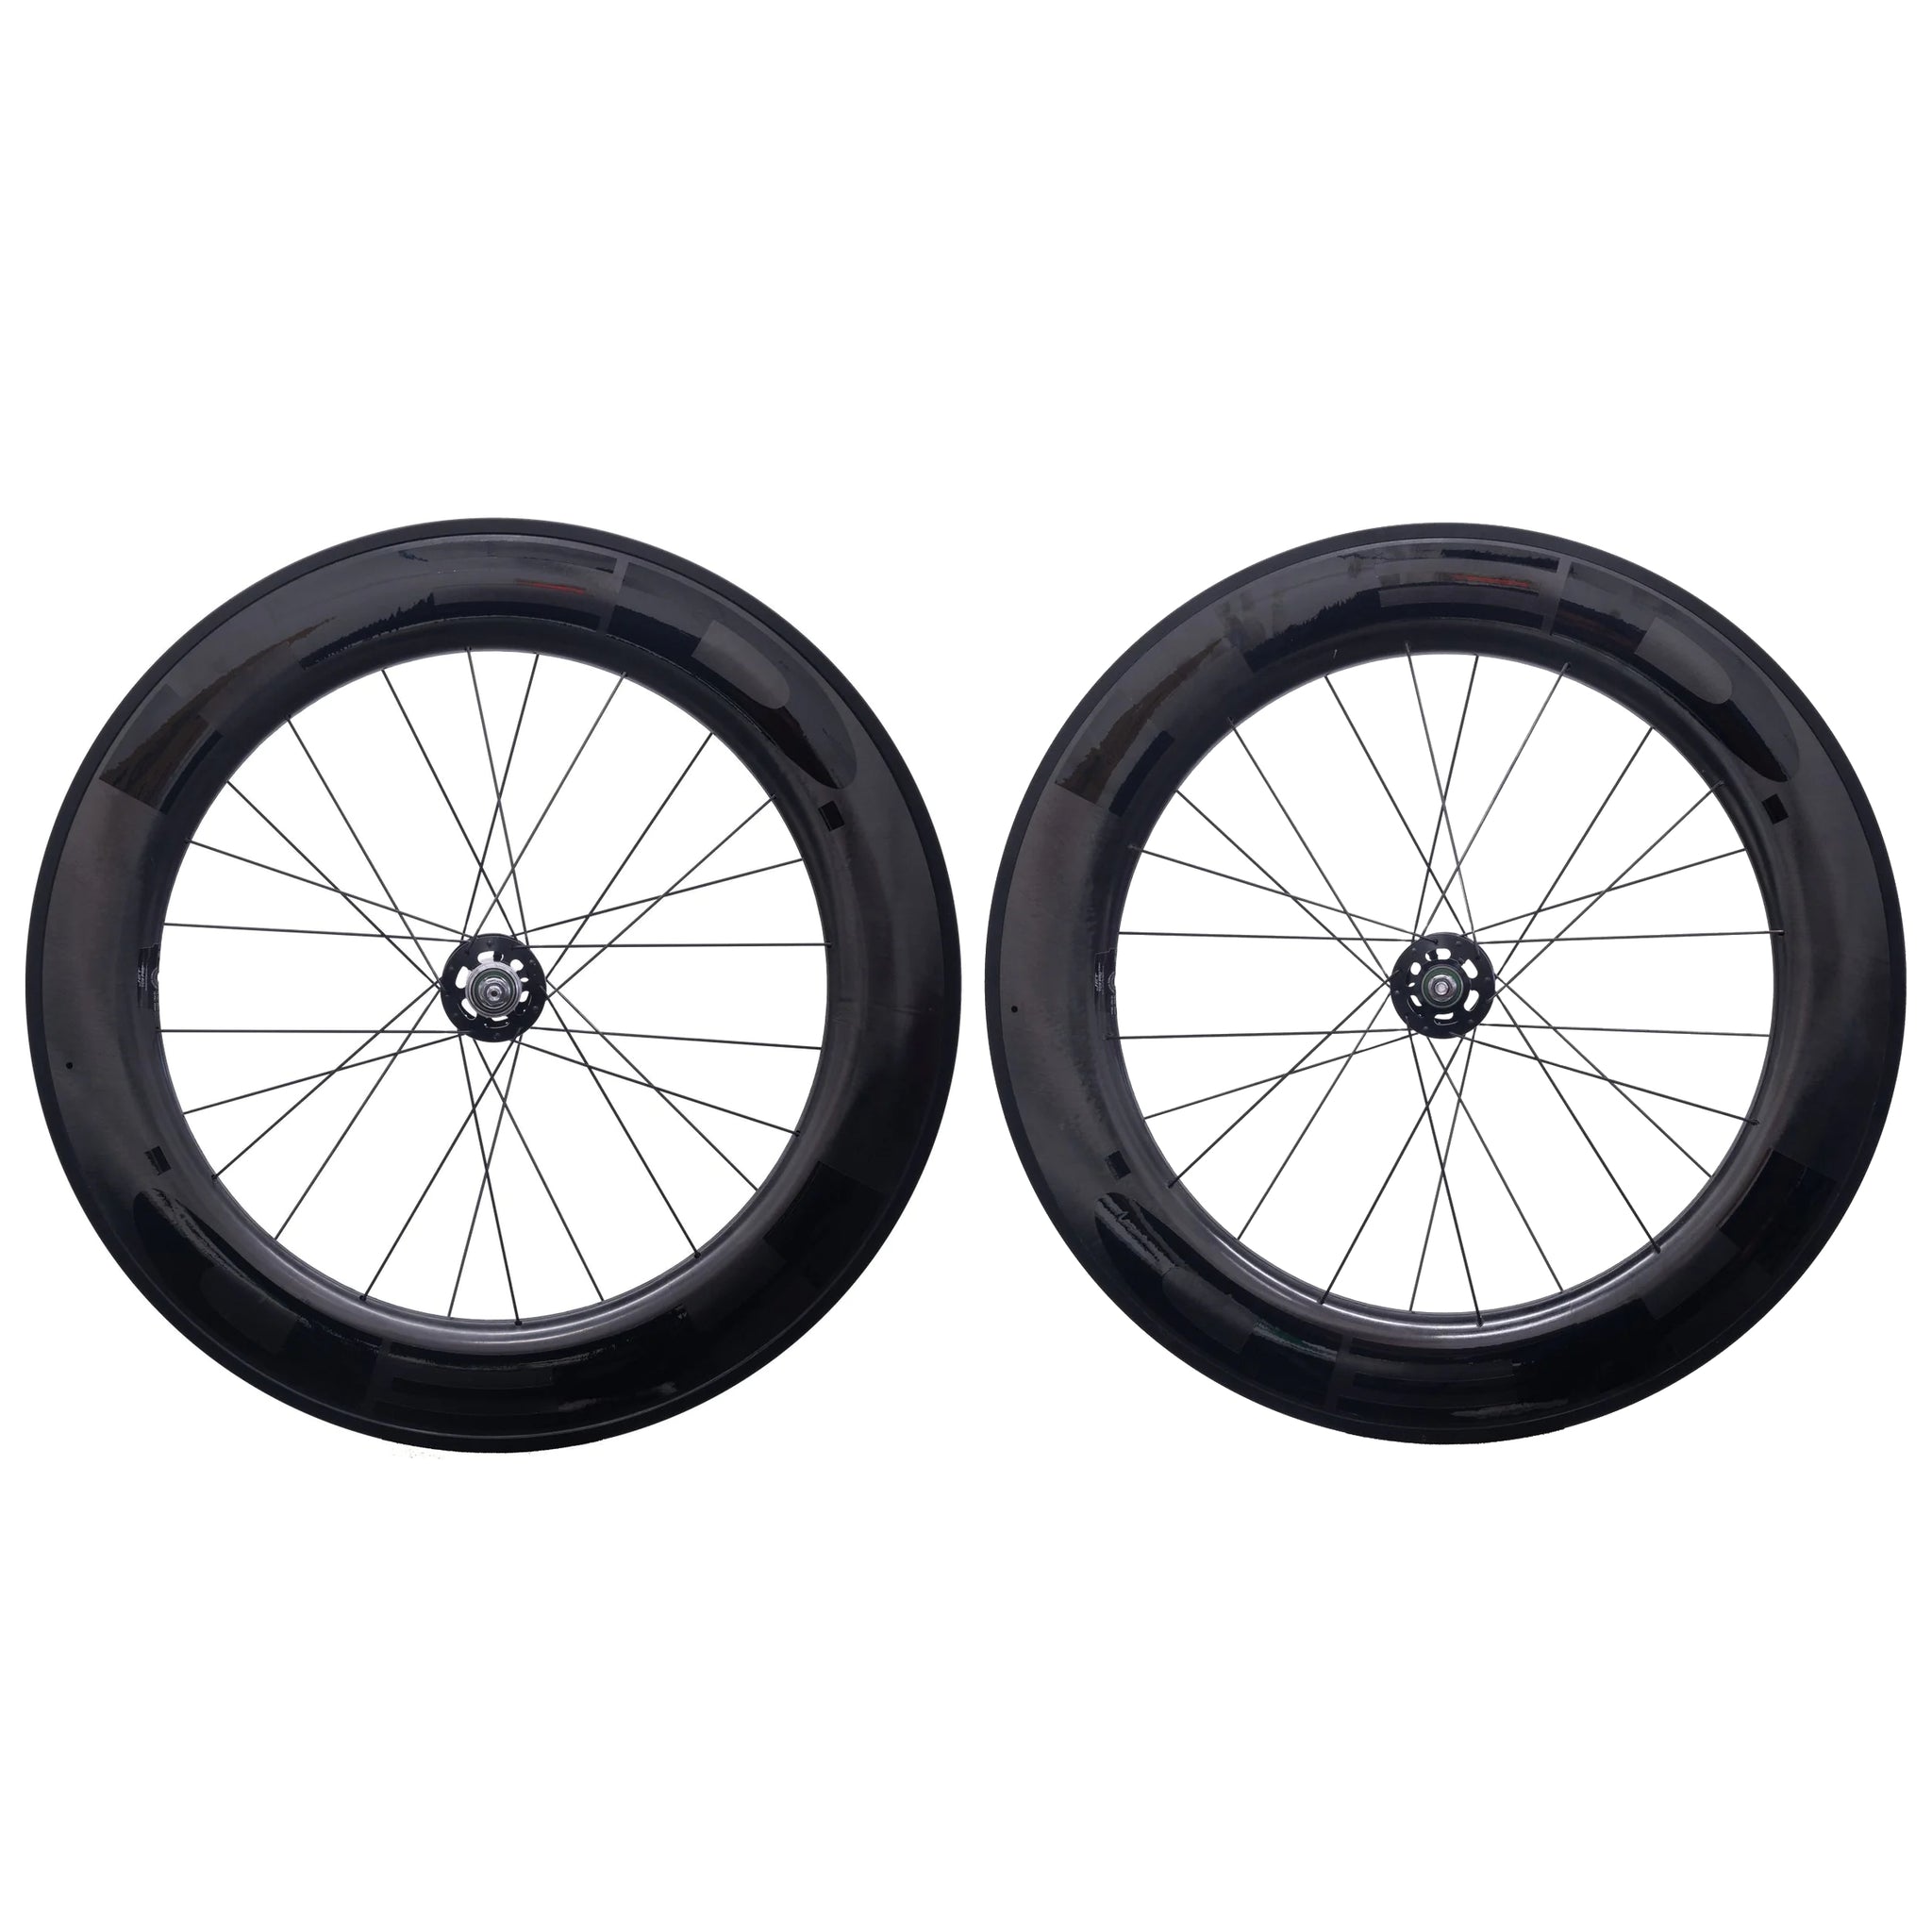 HED Jet 9 carbon track wheelset - Retrogression Fixed Gear